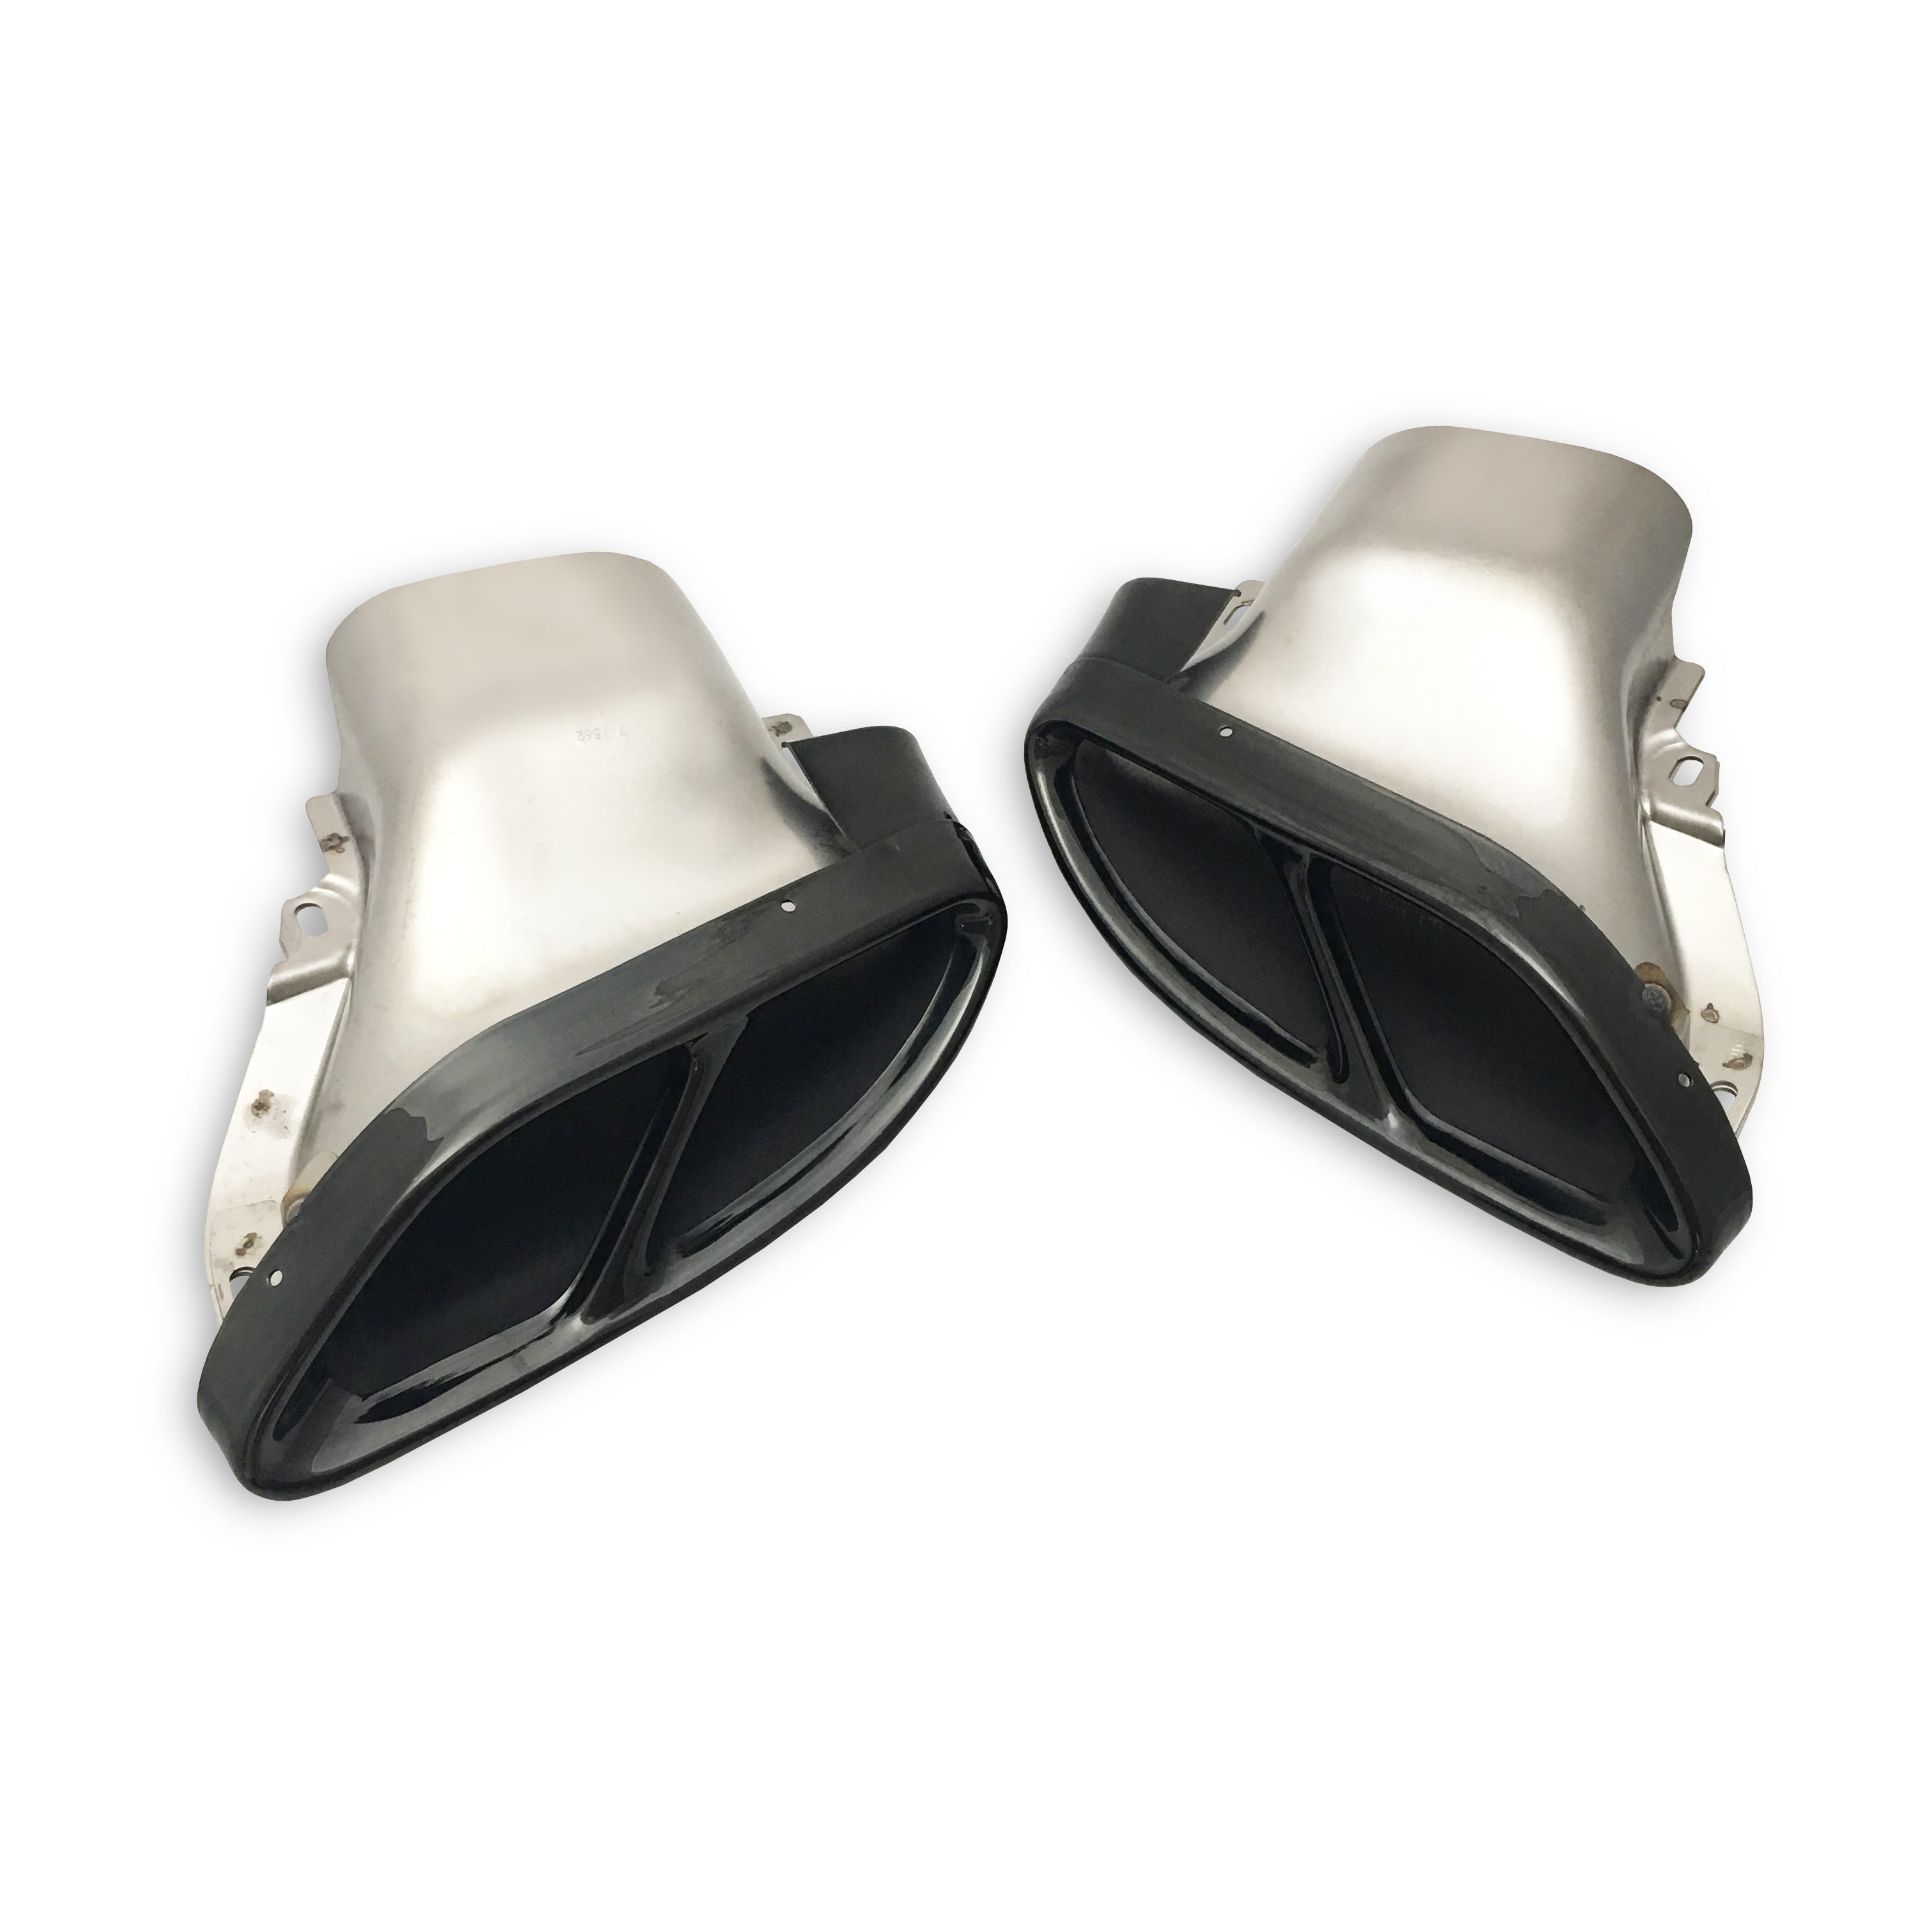  Mercedes Benz C-Class/C43 OEM C43 Style Black Chrome Stainless Steel Exhaust Tips - Manufactured from 304 Stainless steel and designed to fit the W205 Saloon/ S205 Estate/ C205 Coupe/ A205 Convertible C-Class and C43 Mercedes Models. This product comes with the original mounting point design to easily replace your existing exhaust tips. 